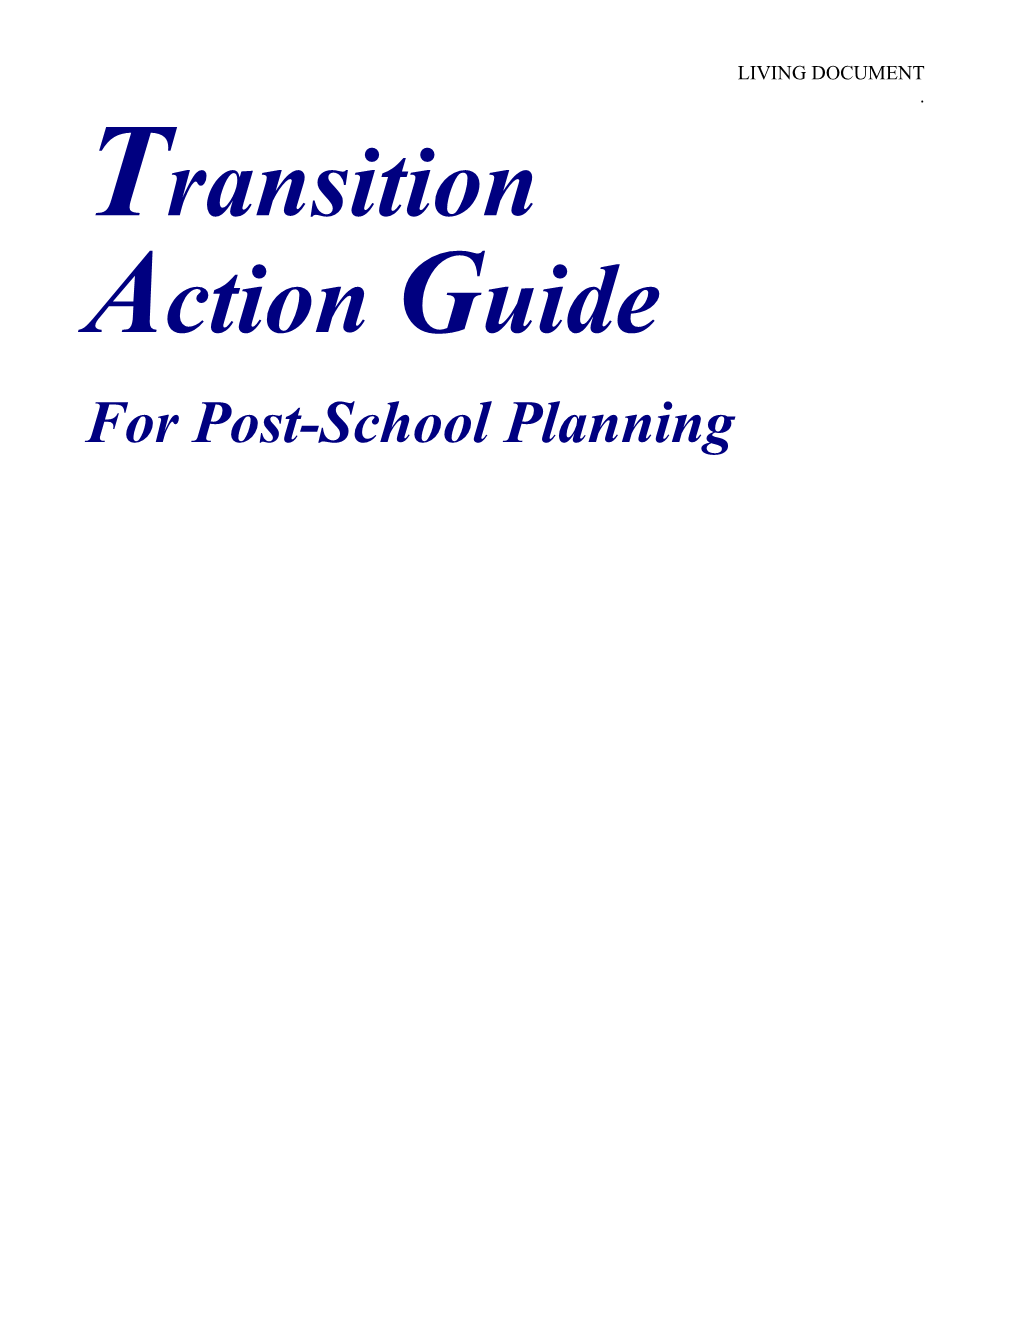 Transition Action Guide (TAG) for Post-School Planning